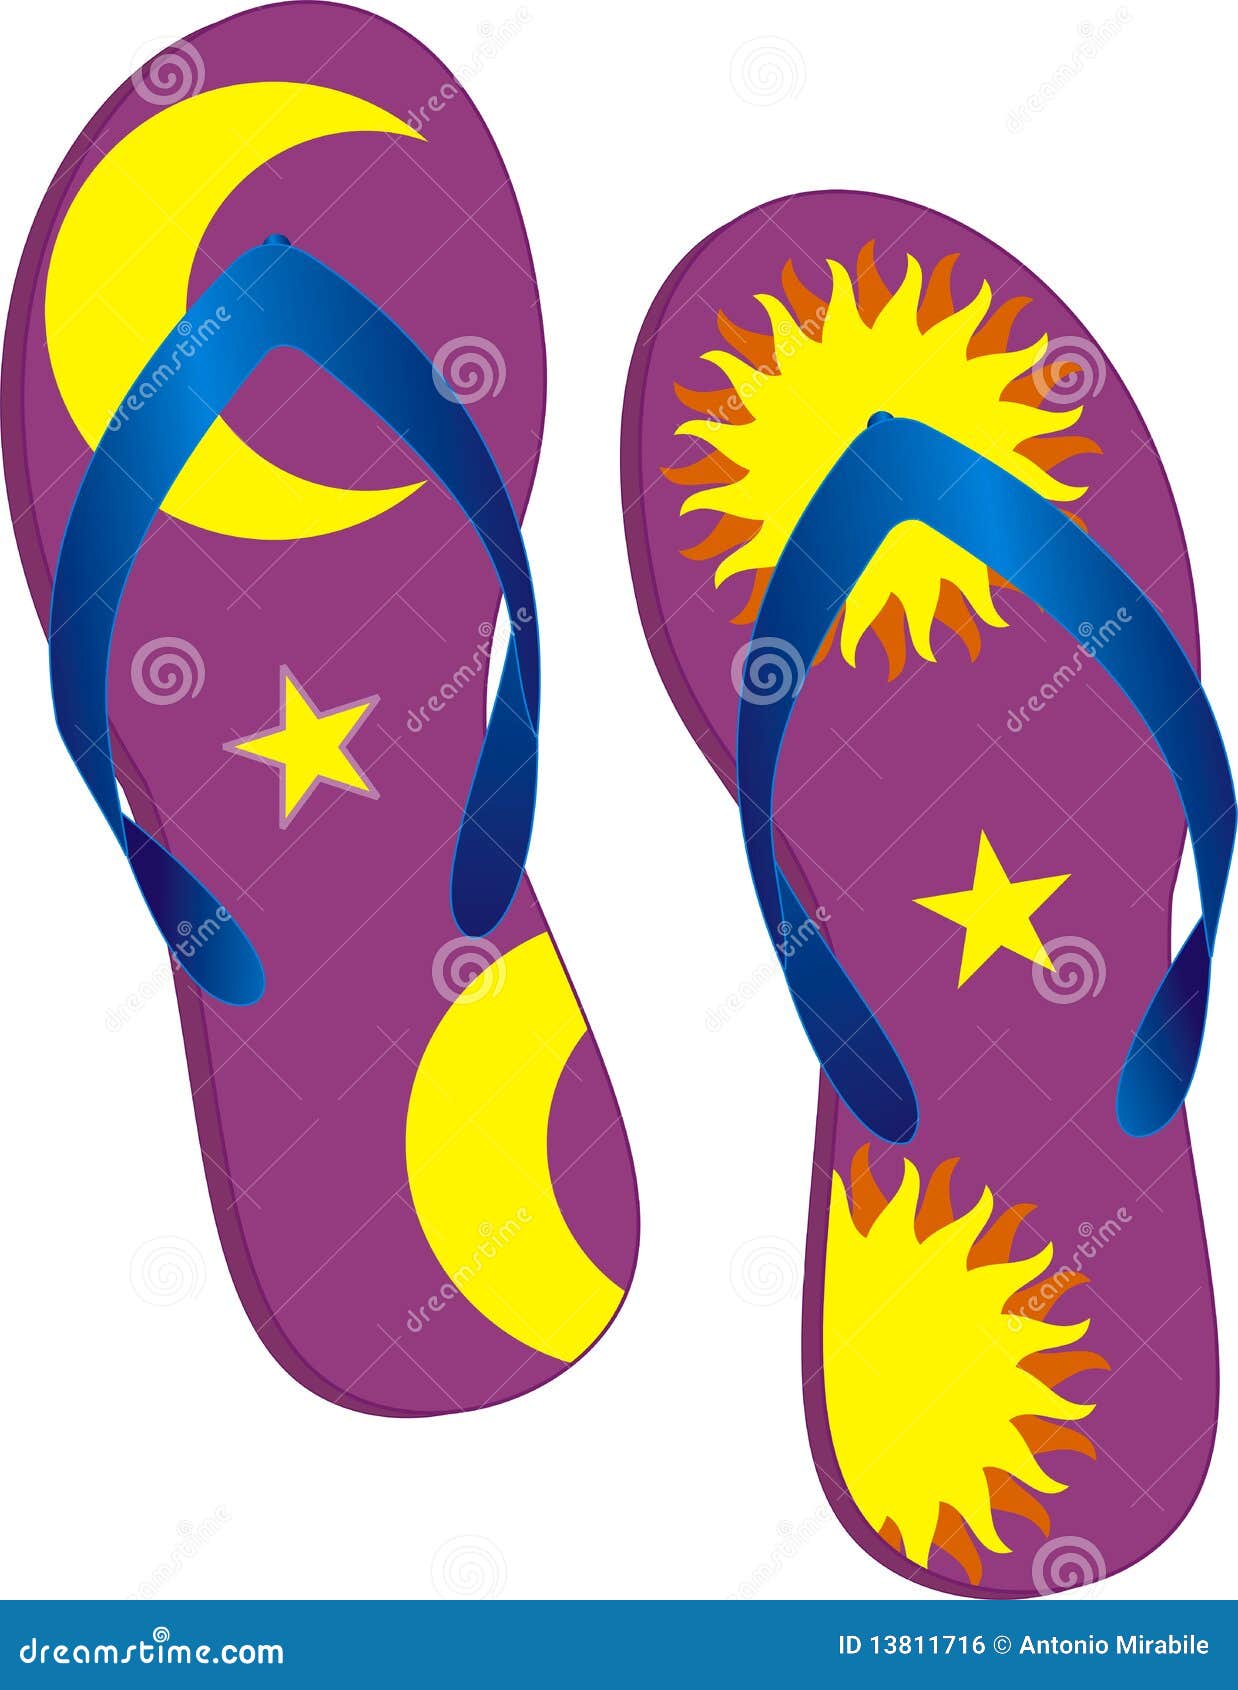 Sandals stock vector. Illustration of holiday, casual - 13811716